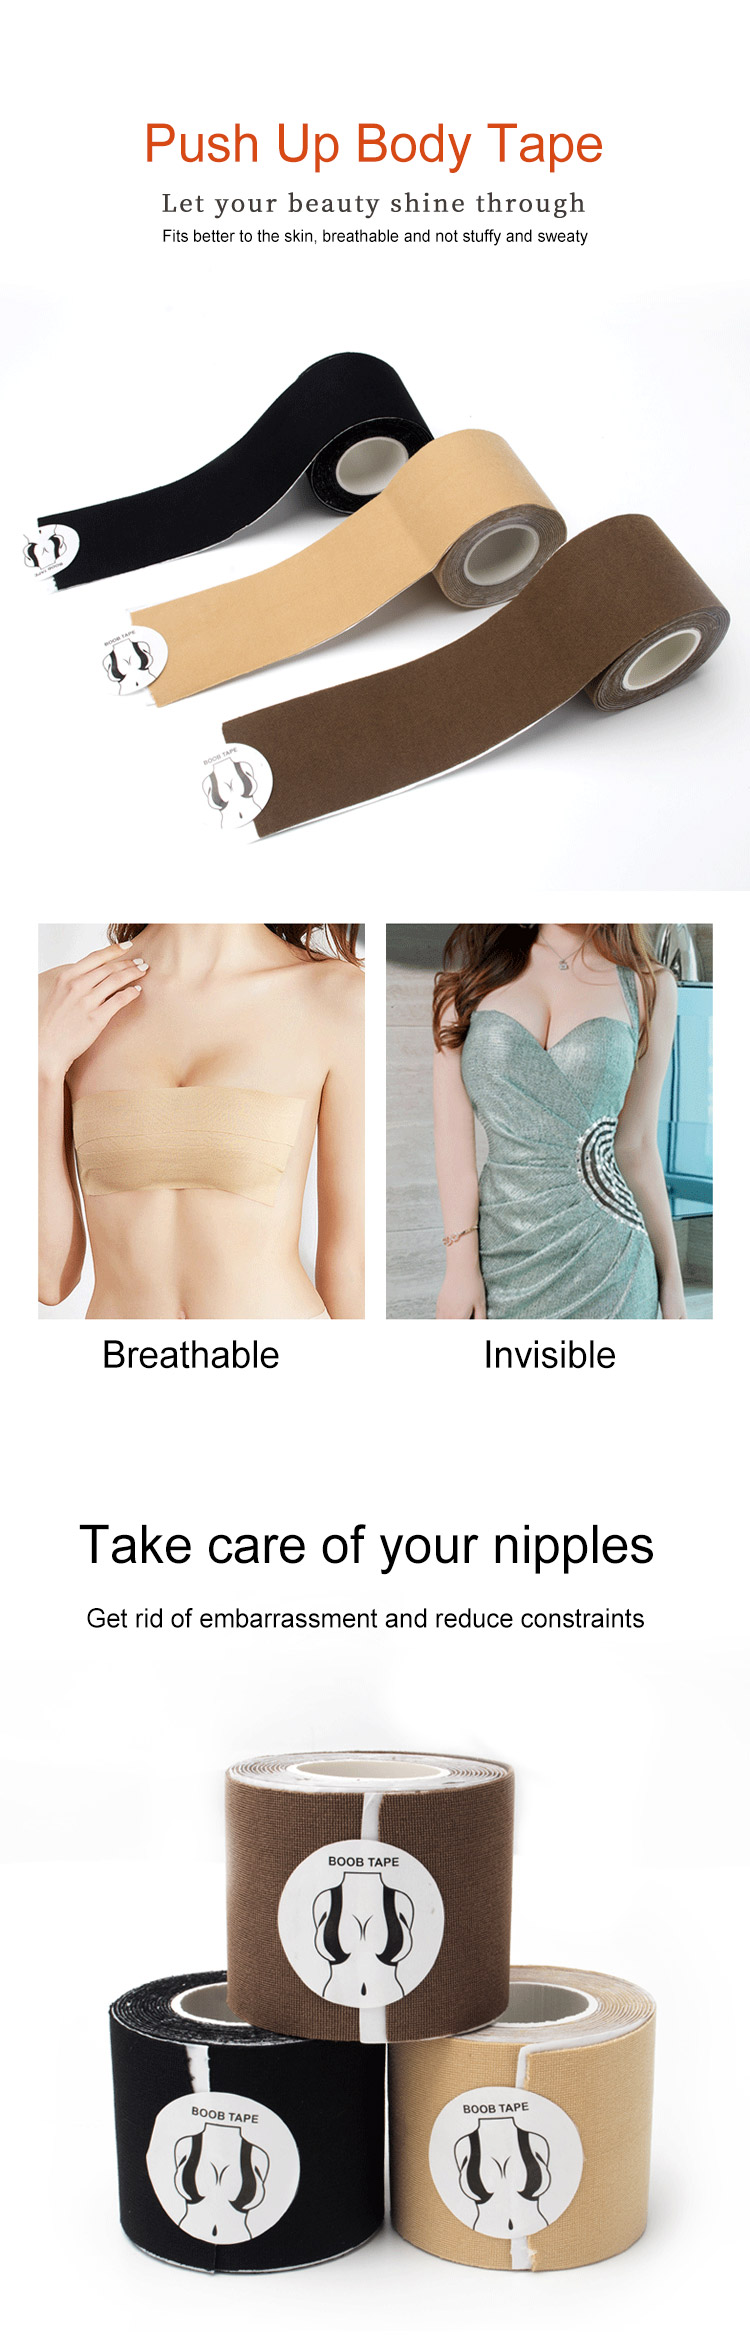 lift it up adhesive silicone bra, sticky bra backless